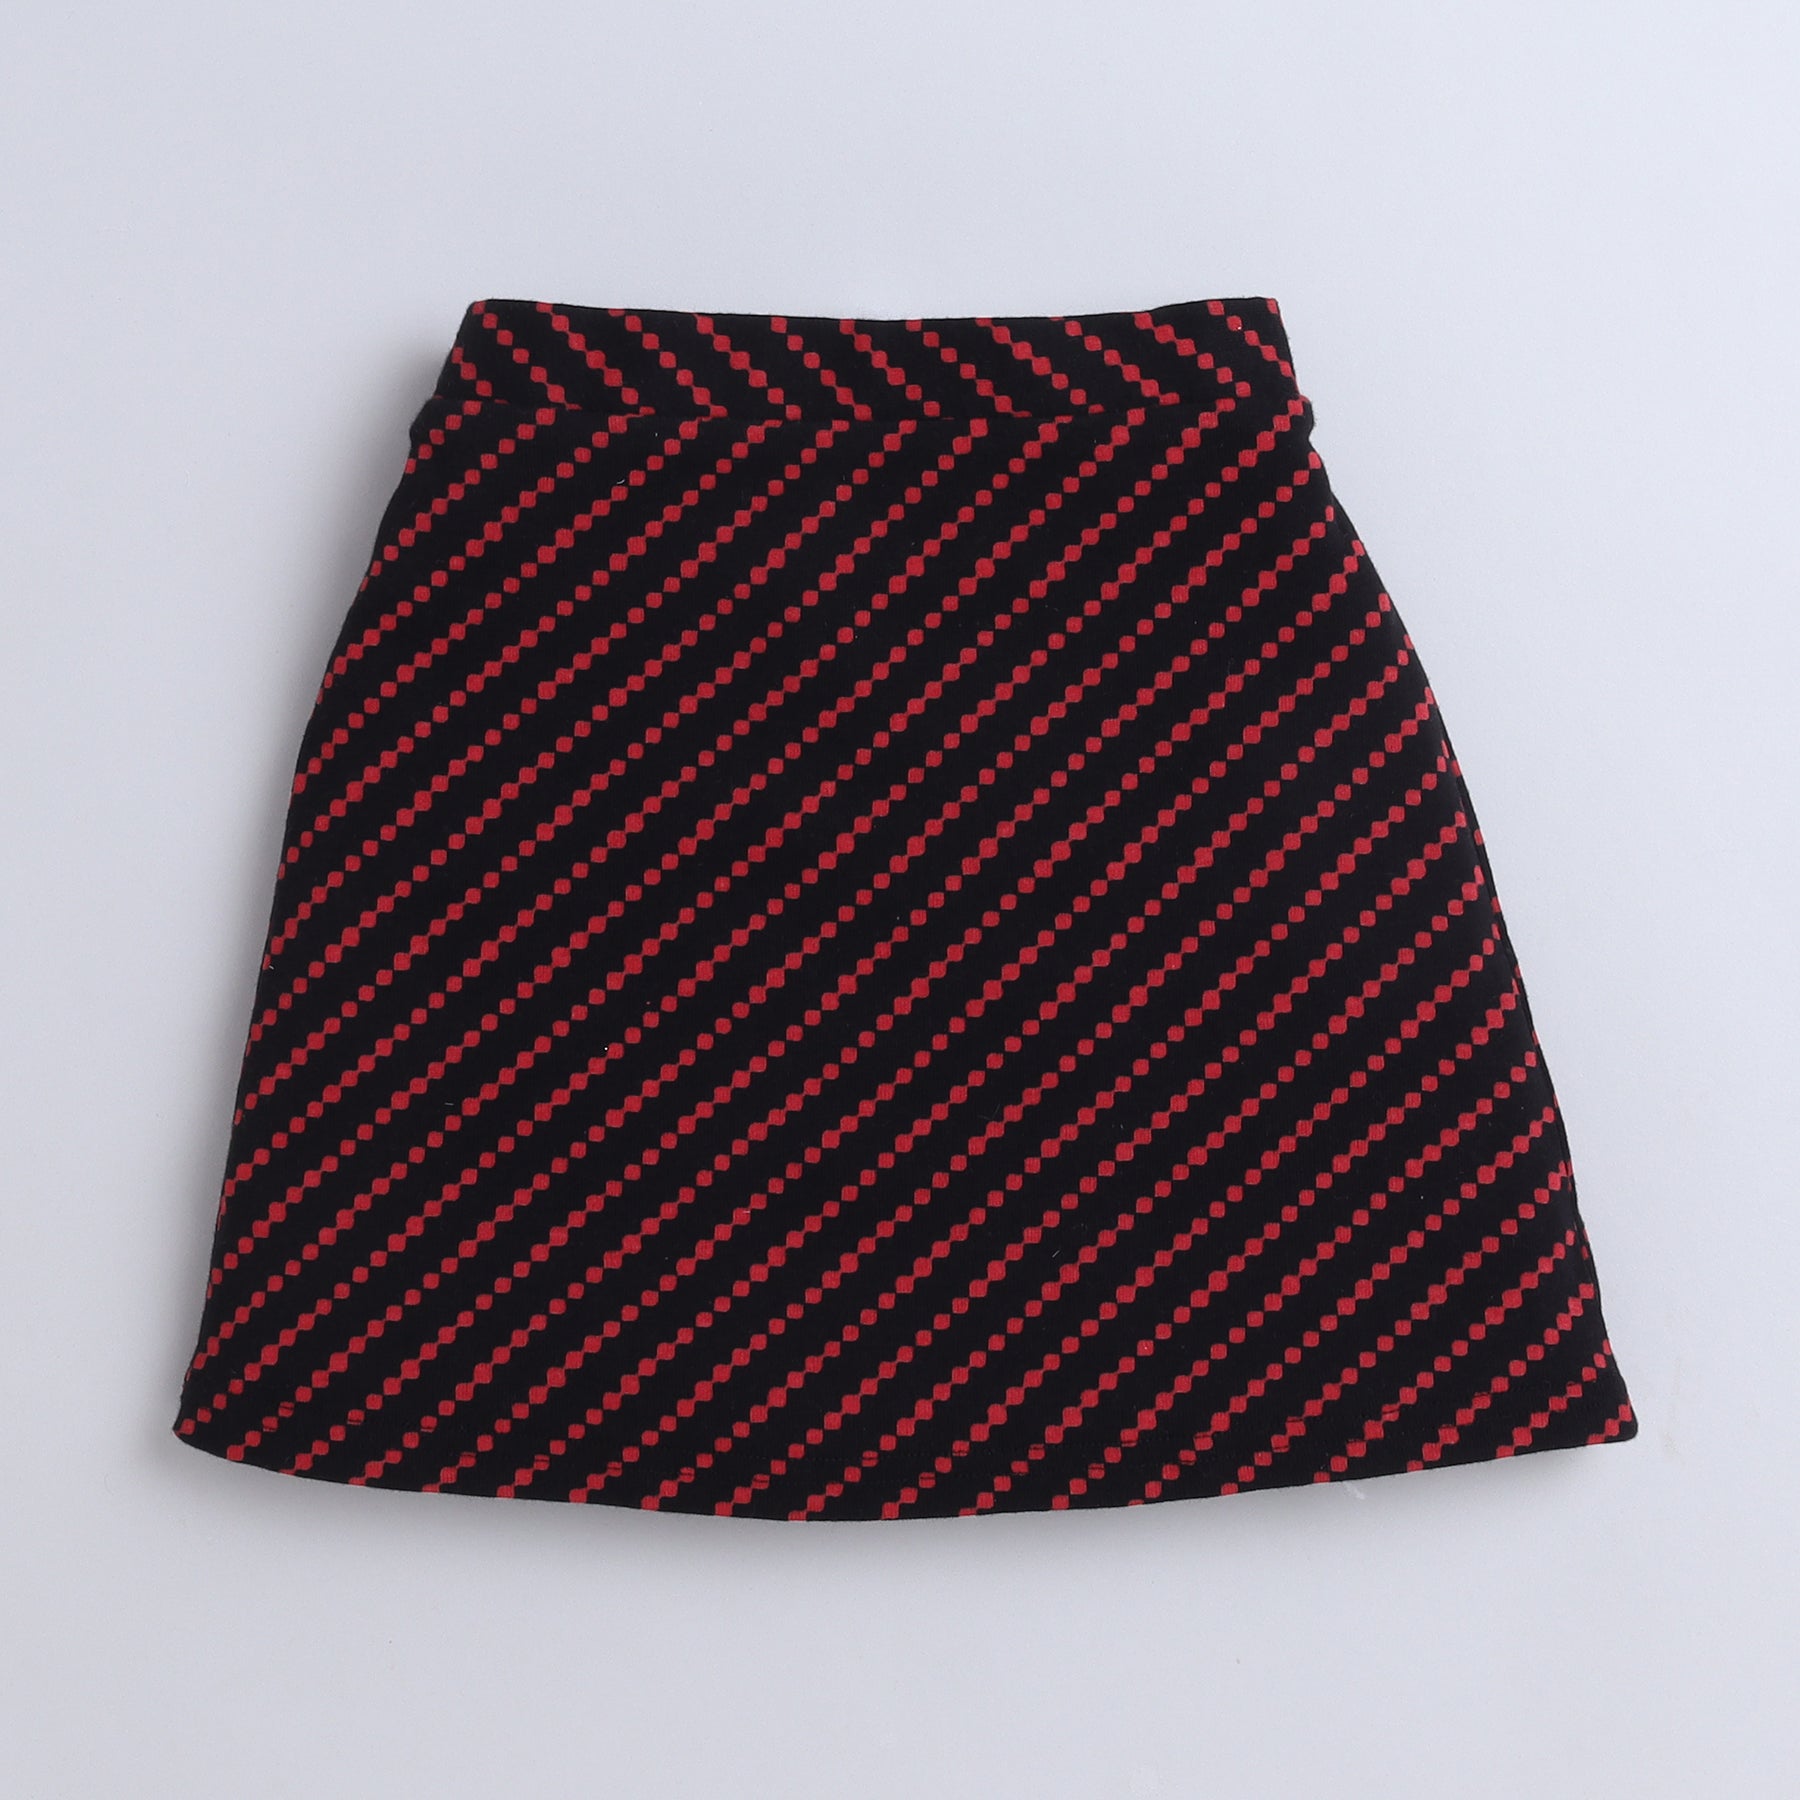 100% cotton stripes printed halter neck crop top with matching skirt set - Black and red